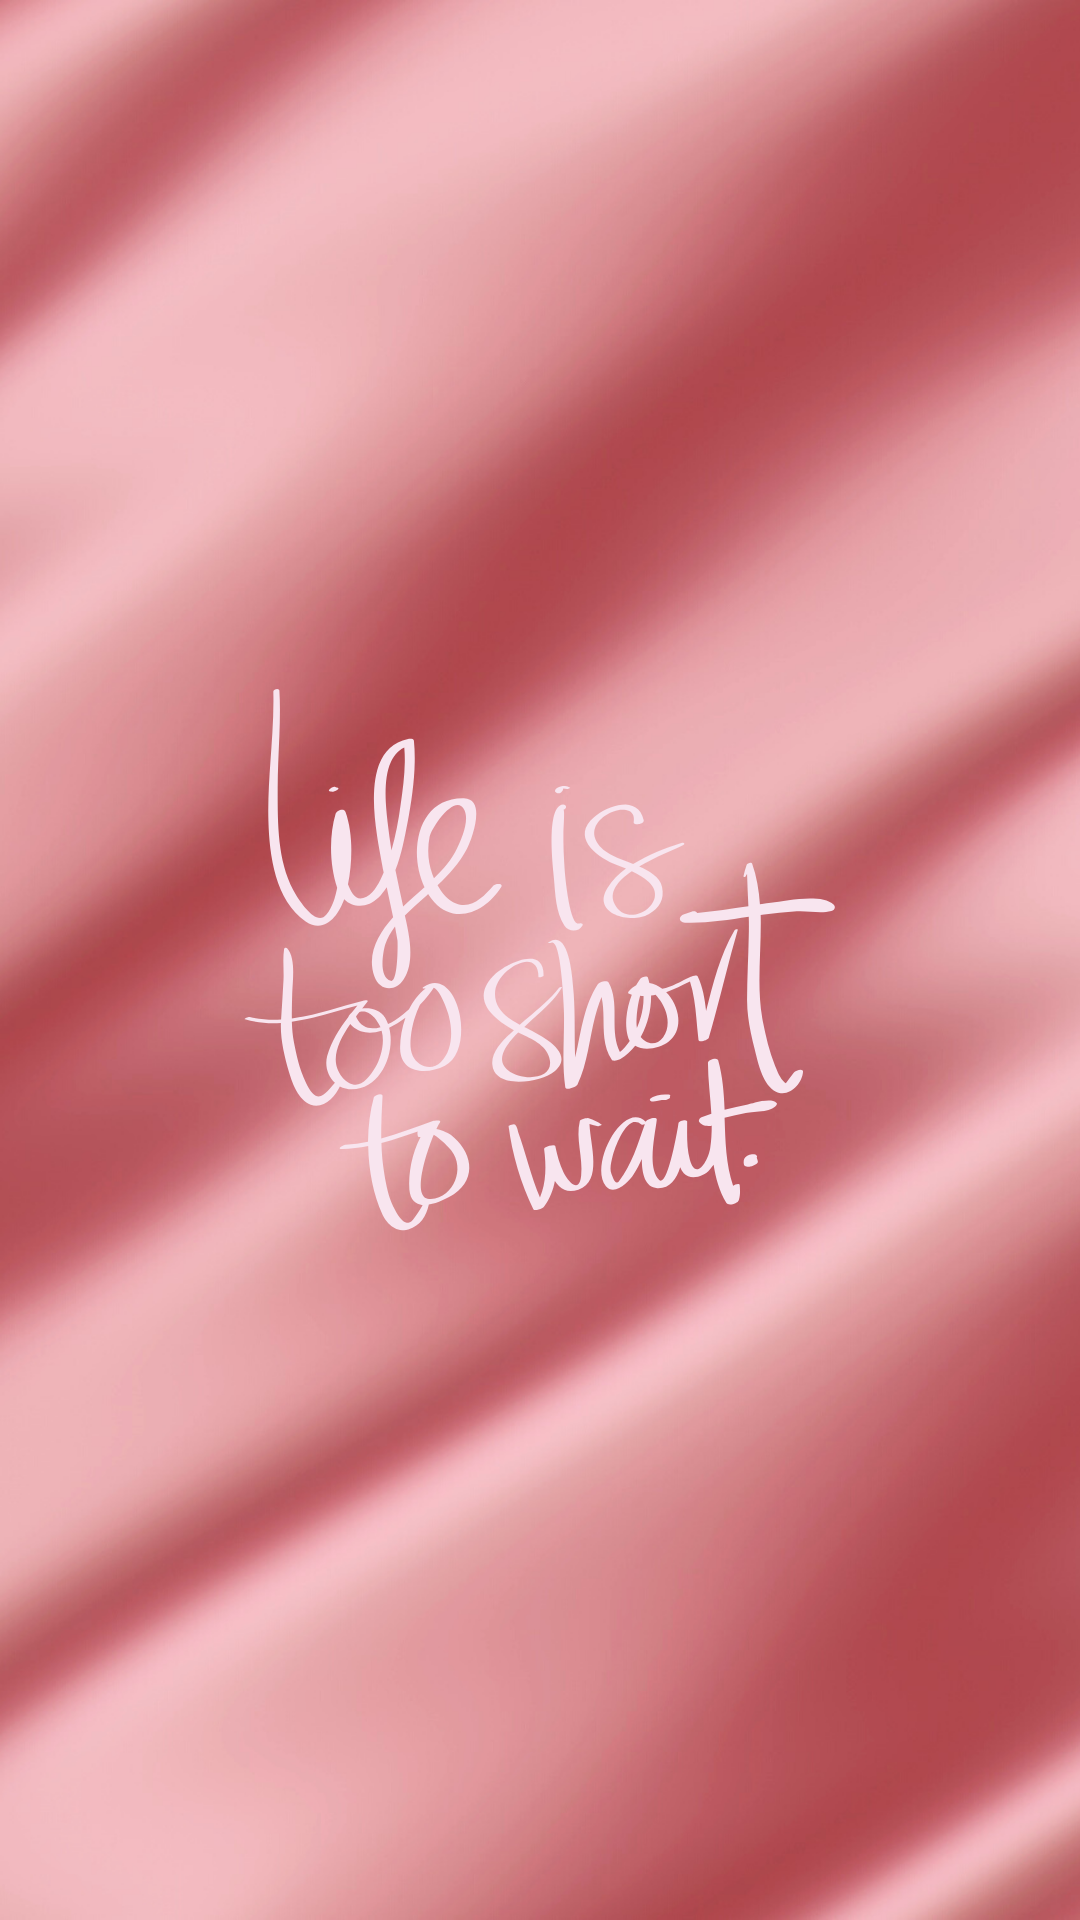 life is too short to wait 